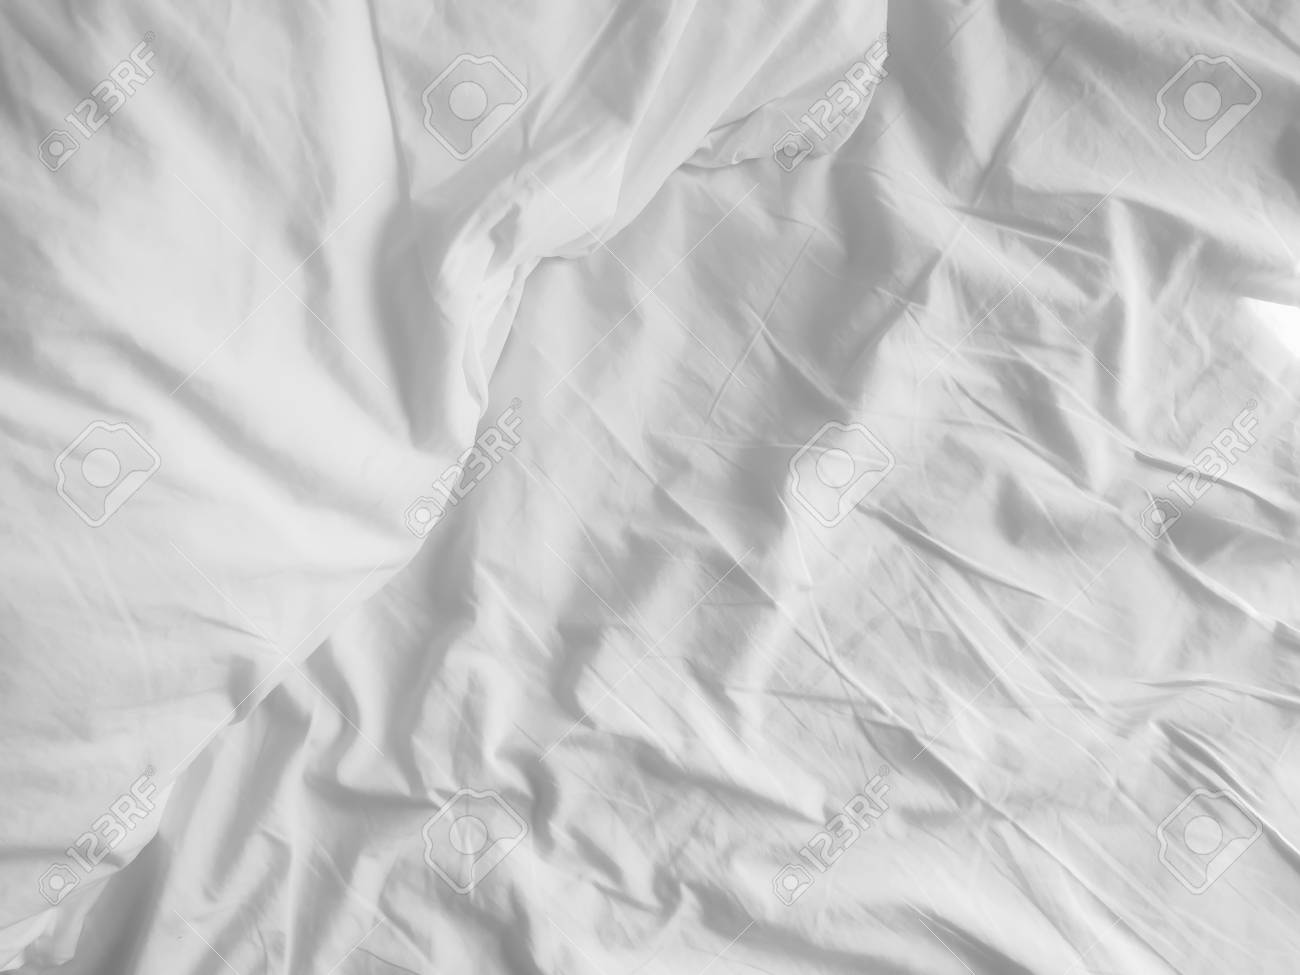 Messy White Bed Sheets Background Stock Photo Picture And Royalty